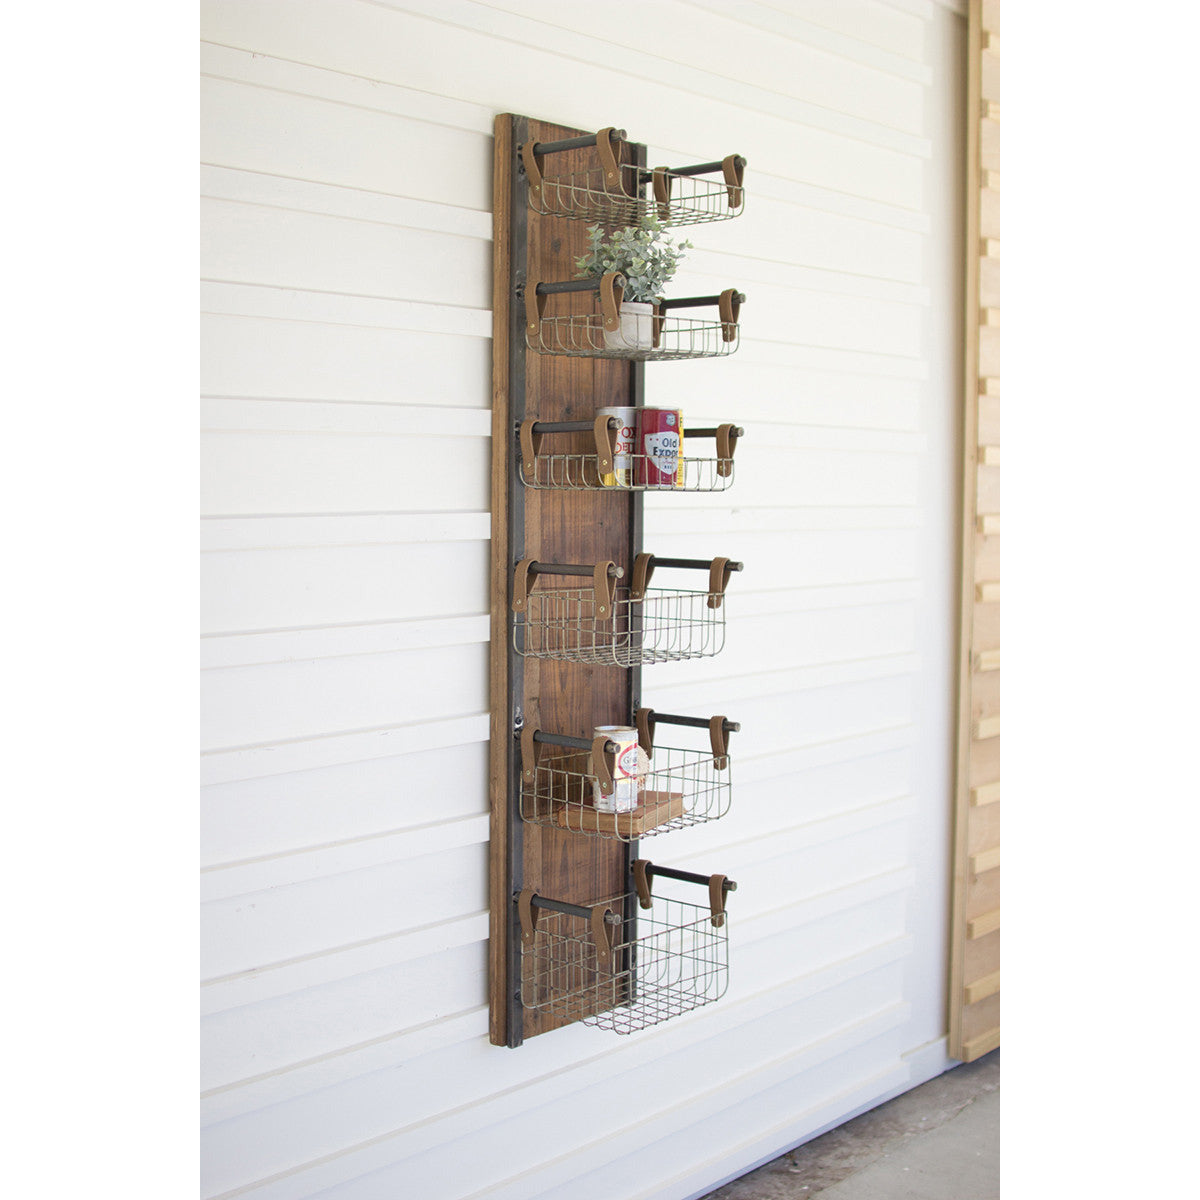 The metal storage rack for reclaimed wood is full!